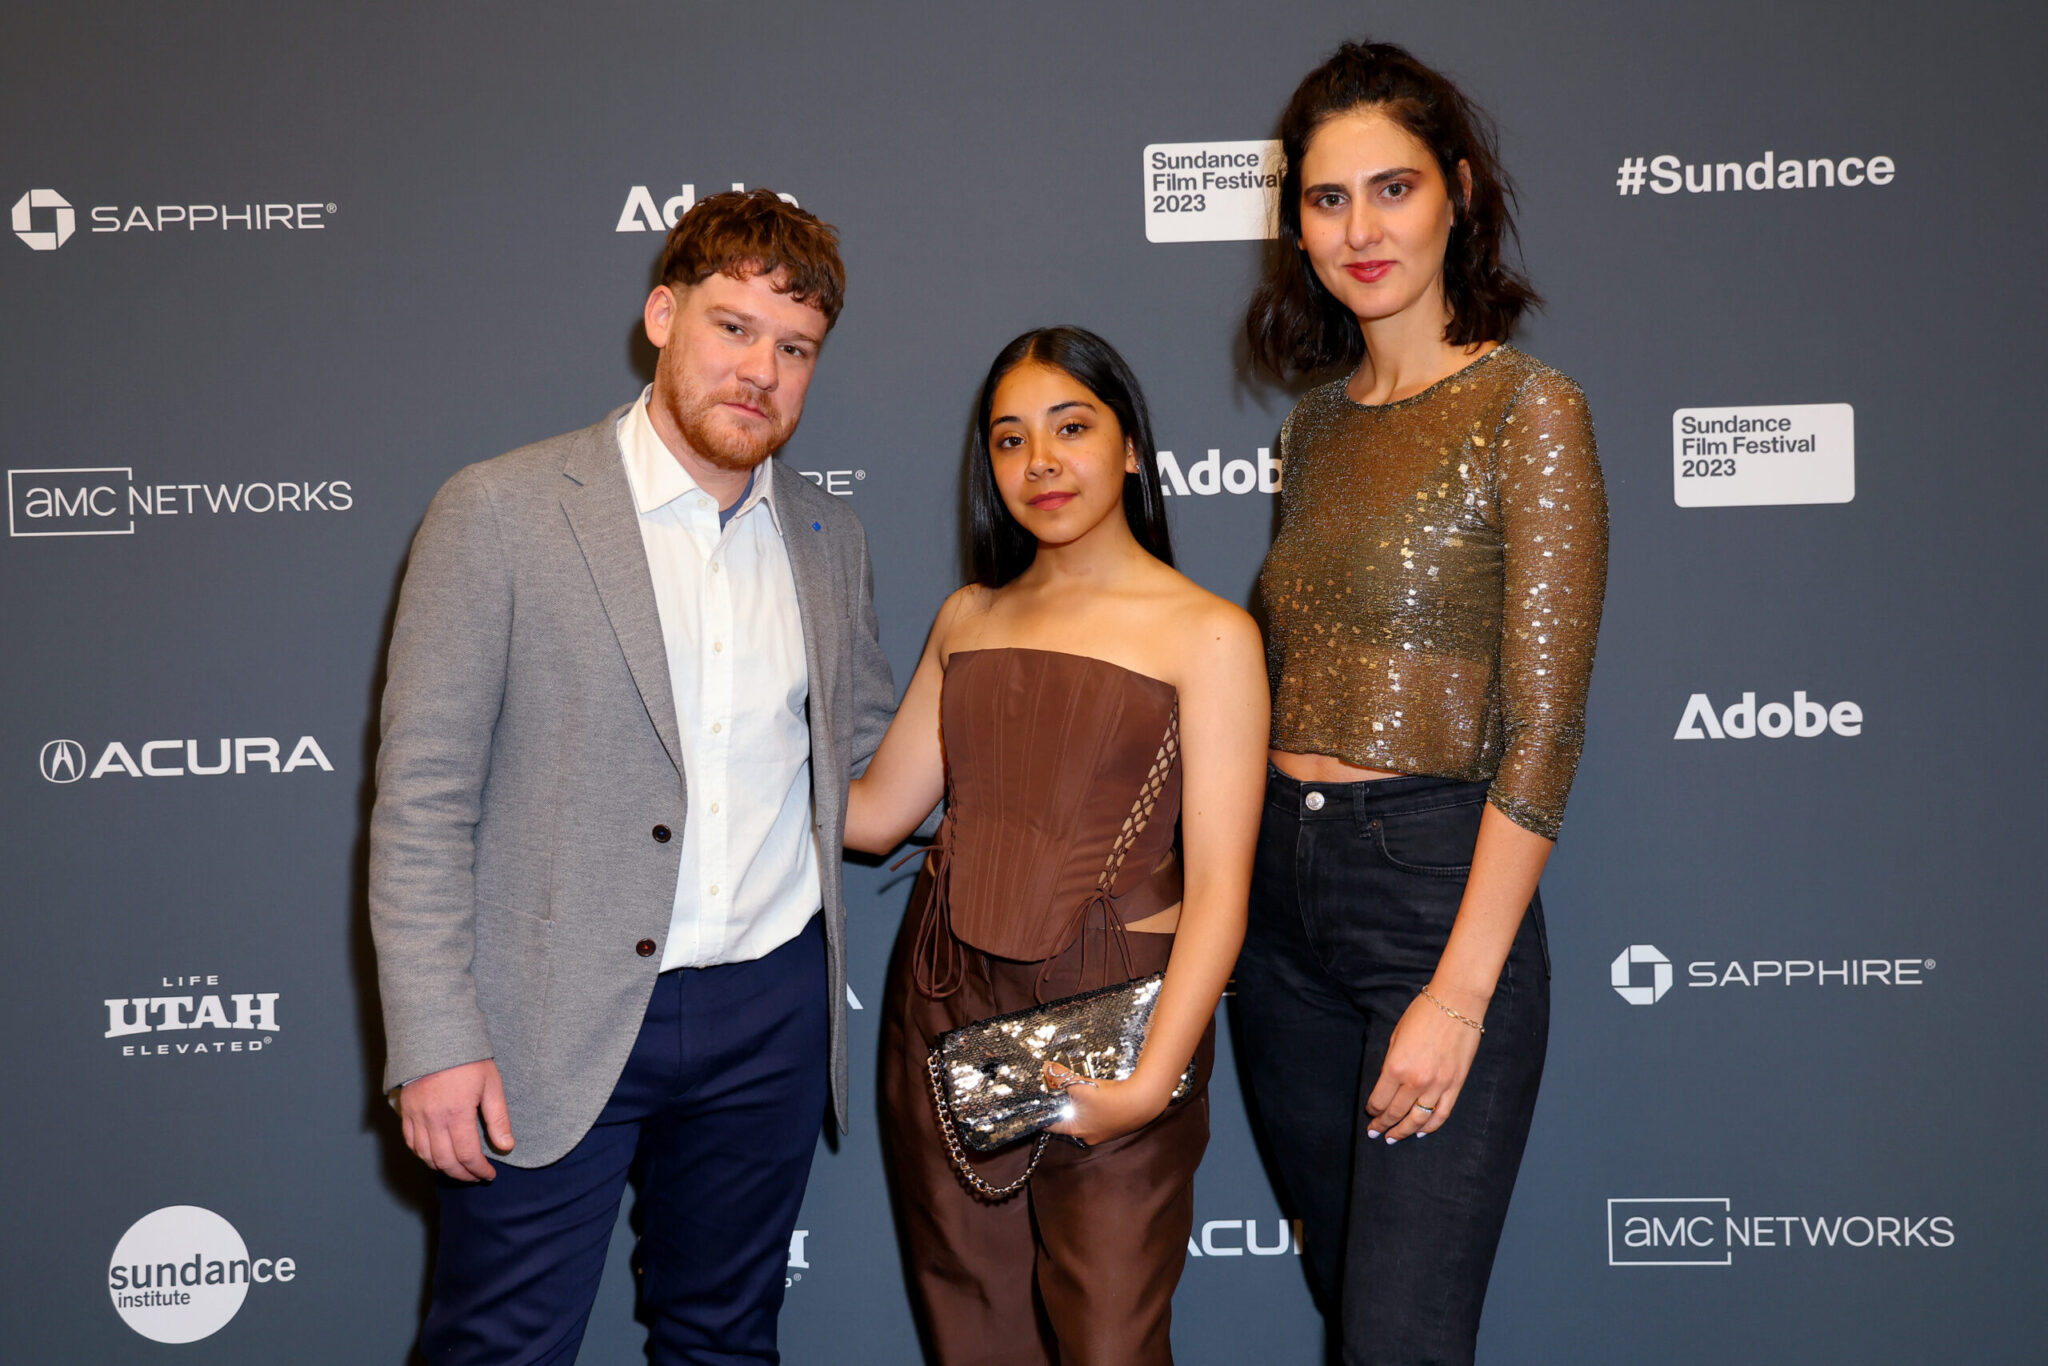 A bearded man with read hair, a white dress shirt, and grey blazer, and woman with long brown hair in a brown tube top and and brown pants, and a woman with short black hair, a sparkly long-sleeved blouse and black pants, all stand in front of a step and repeat at the 2023 Sundance Film Festival.